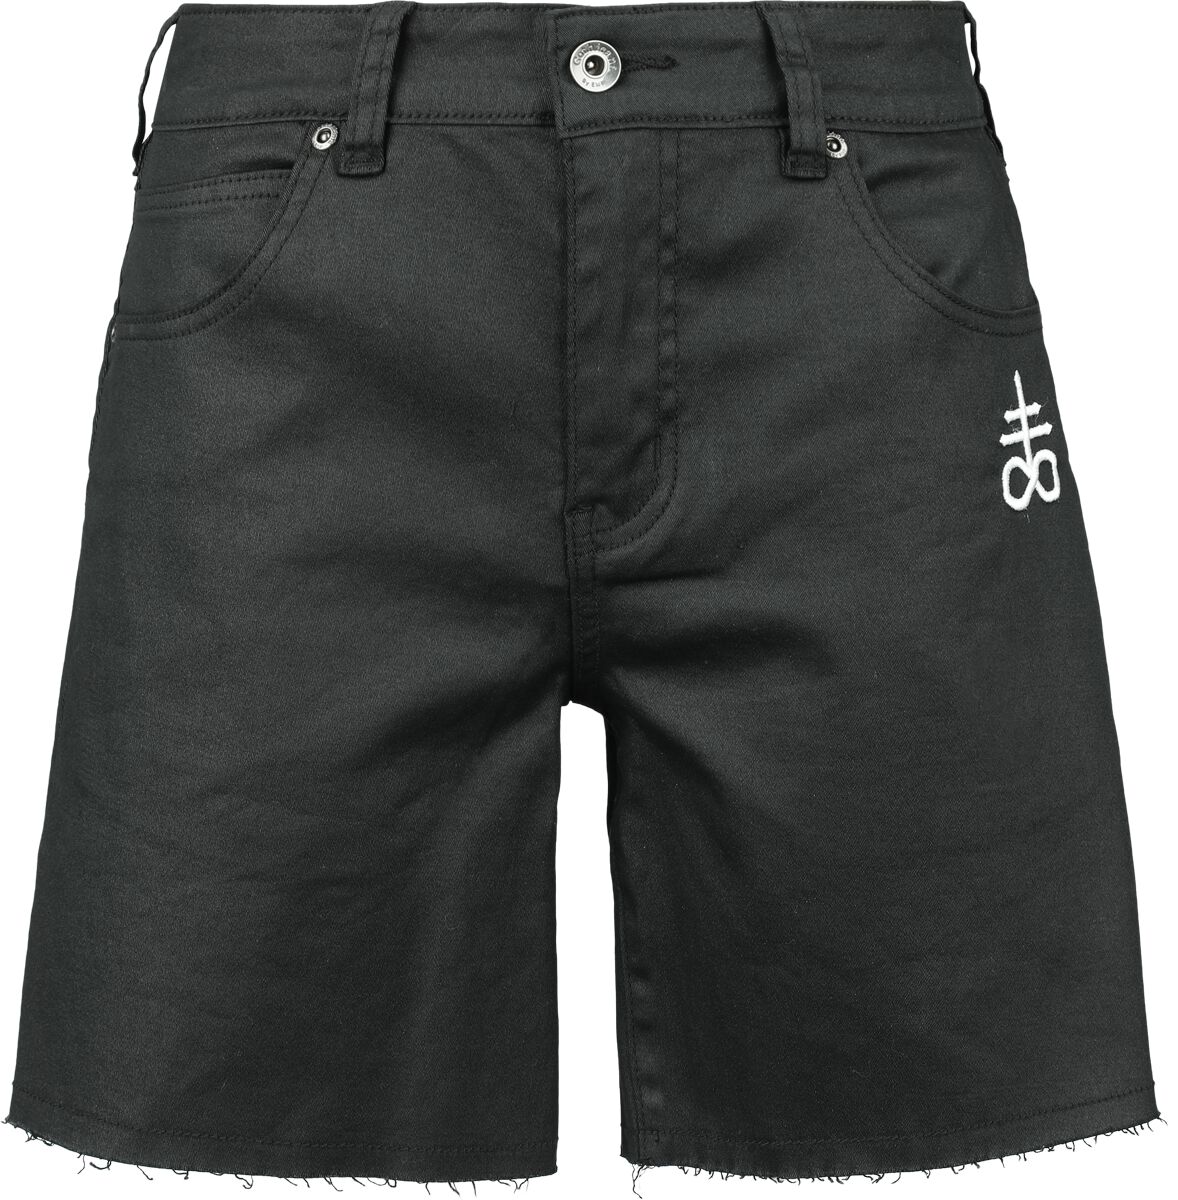 Black Blood by Gothicana - Coated Shorts with Small Embroidery - Short - schwarz - EMP Exklusiv!